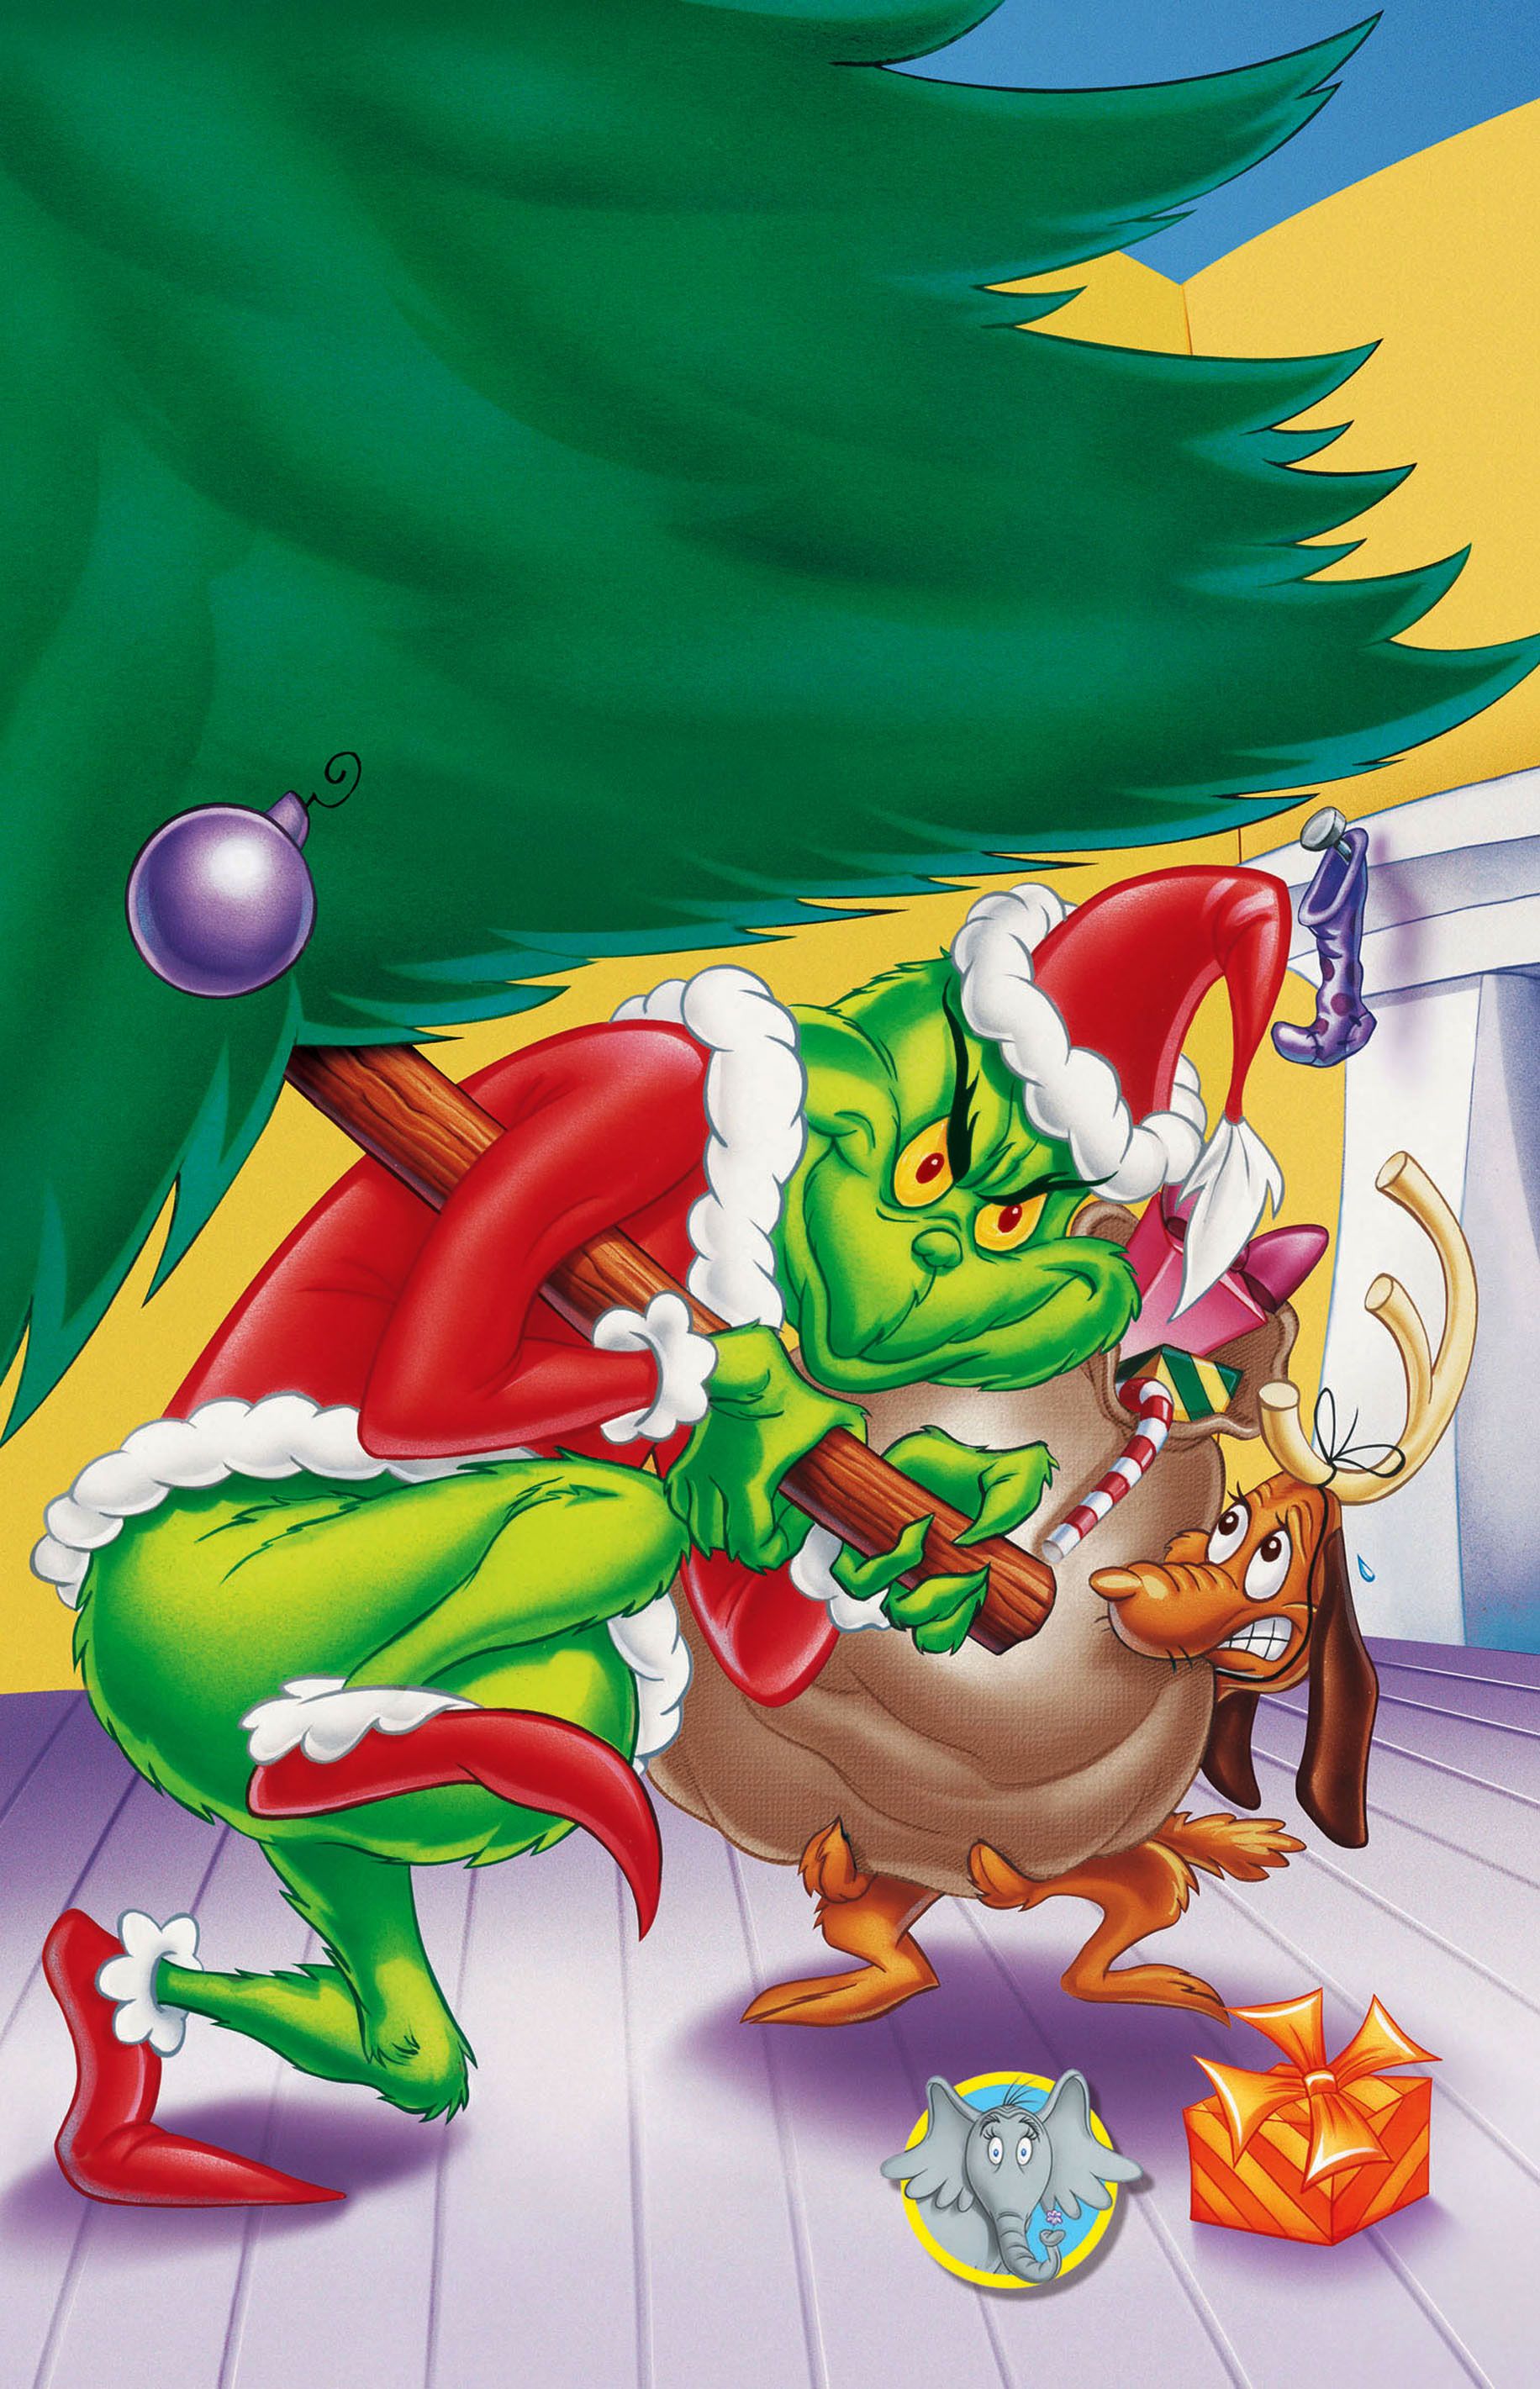 Grinch Stole Christmas Cartoon Porn - The Grinch Is â€¦ Totally Kind of Hot?